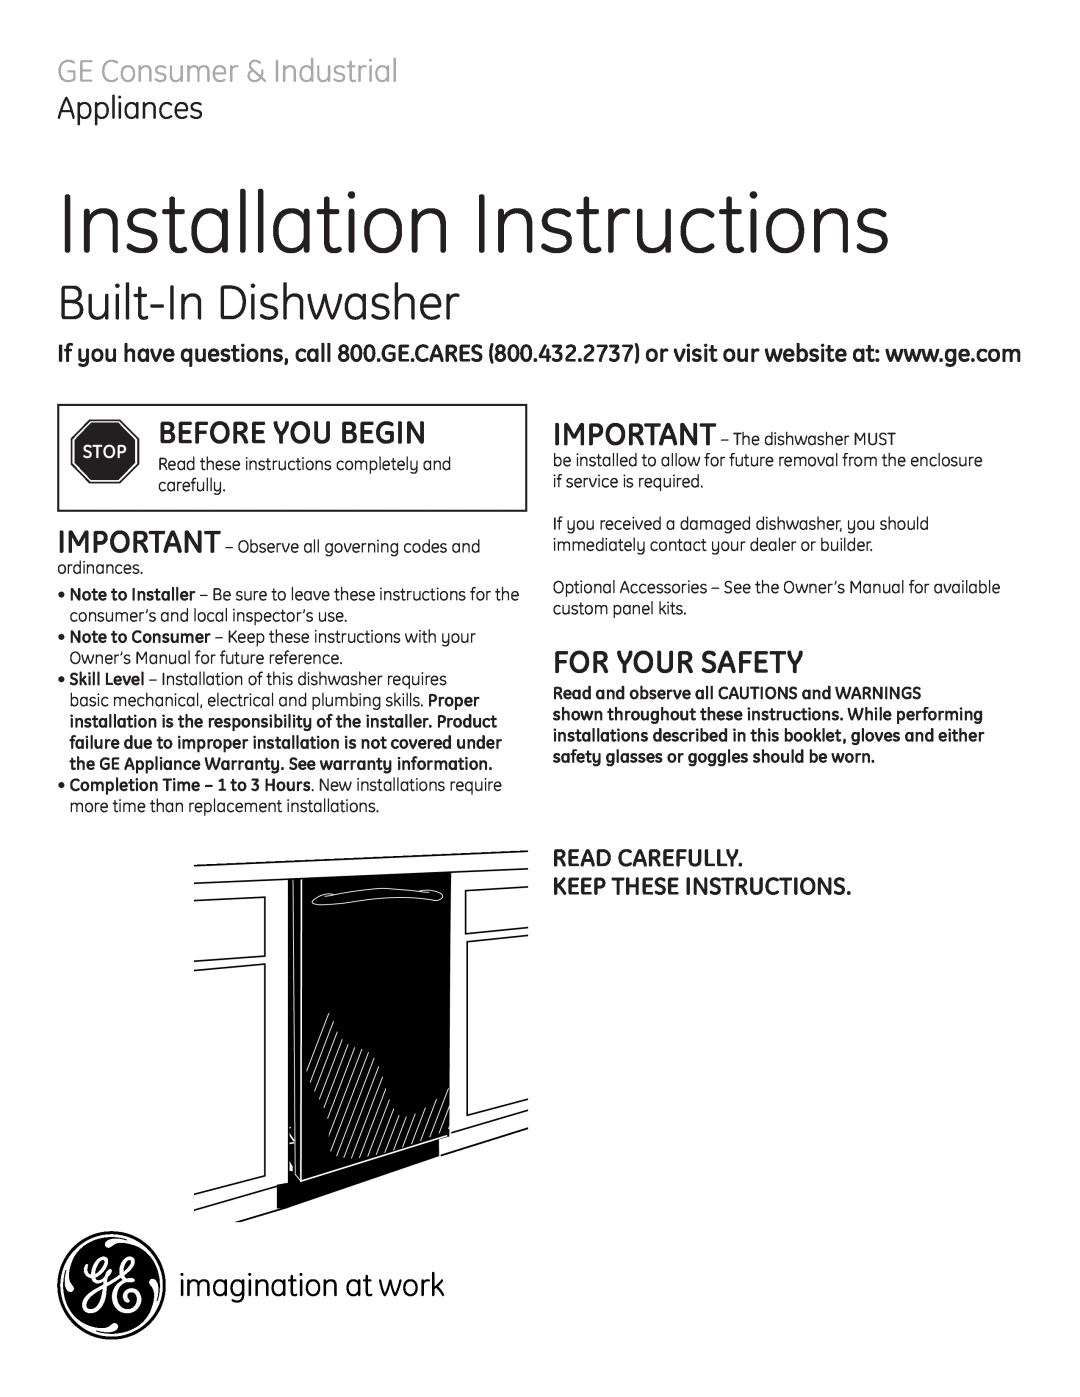 GE Built-In Dishwasher installation instructions Before You Begin, For Your Safety, Read Carefully Keep These Instructions 